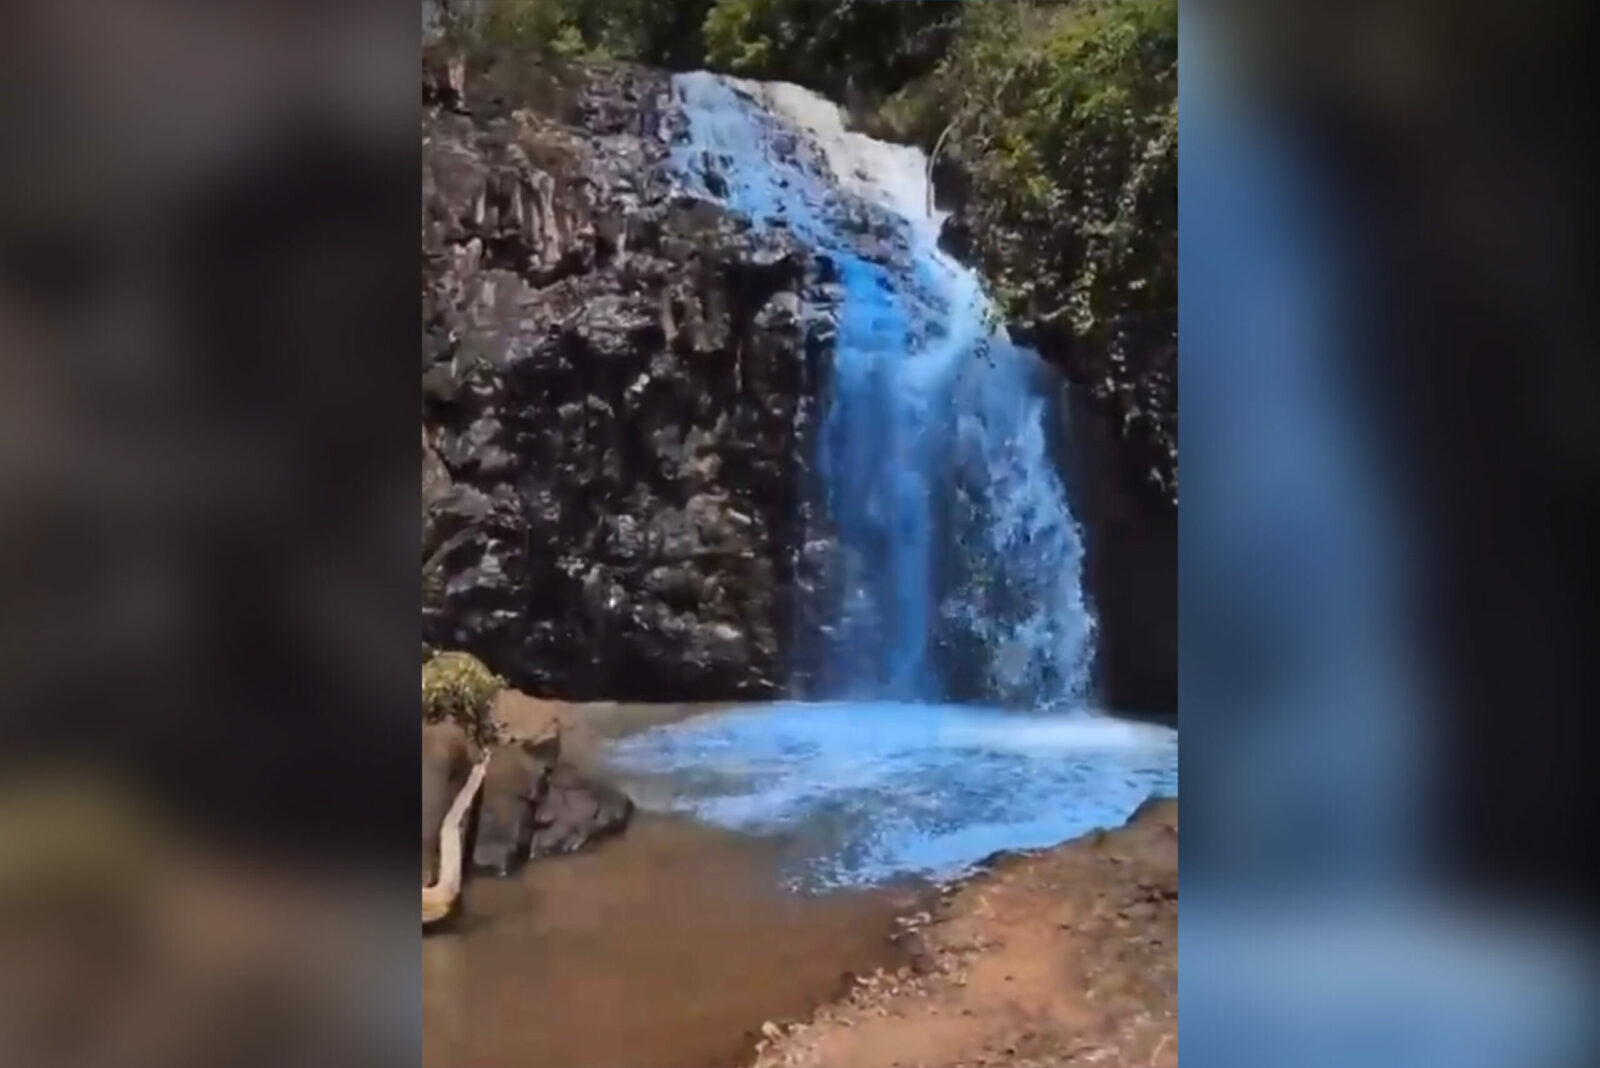 Waterfall Dyed Blue For Gender Reveal Leads To Investigate And Fines